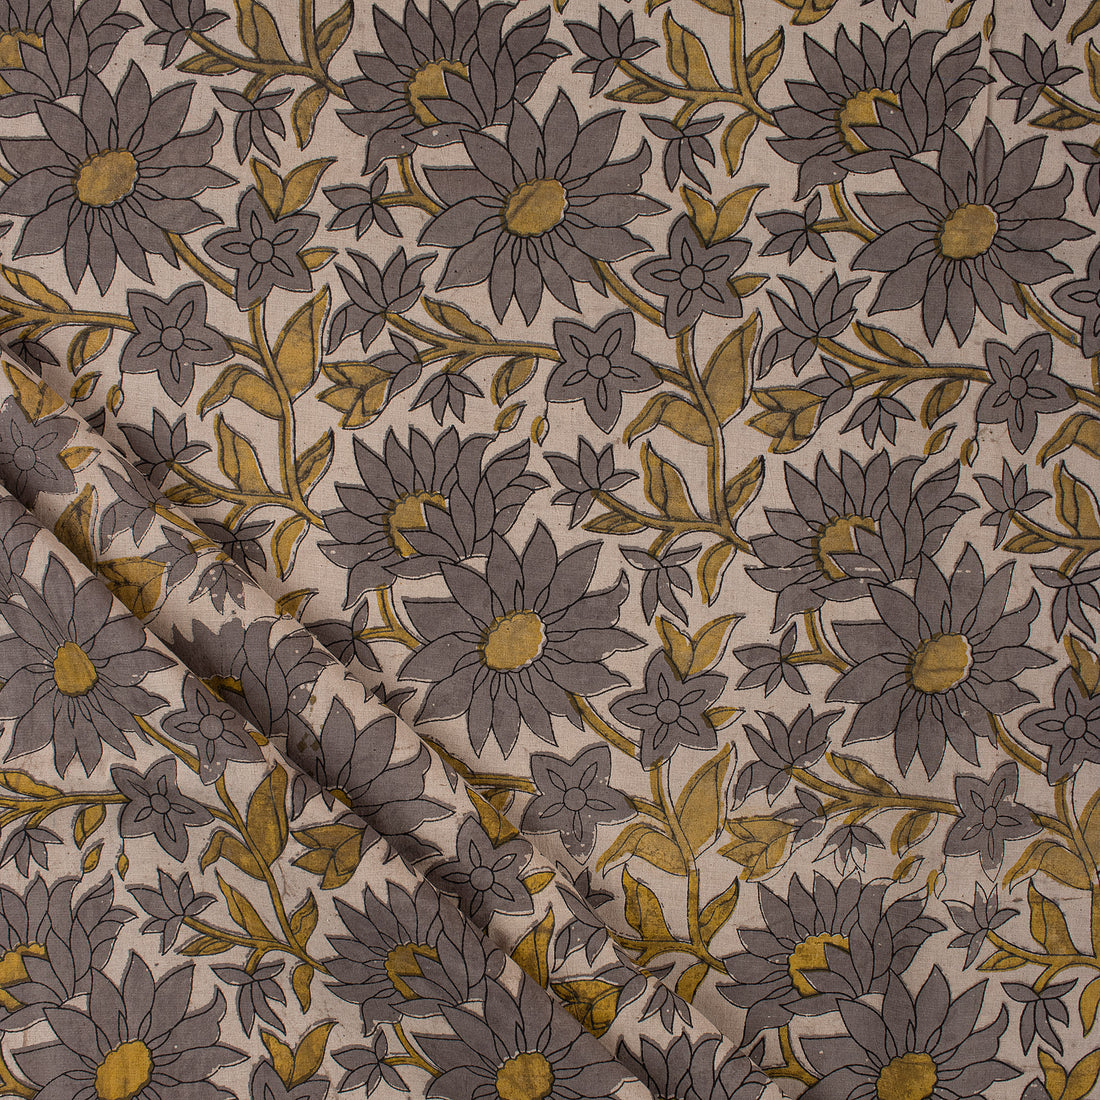 Floral Printed Pure Organic Cotton Fabric